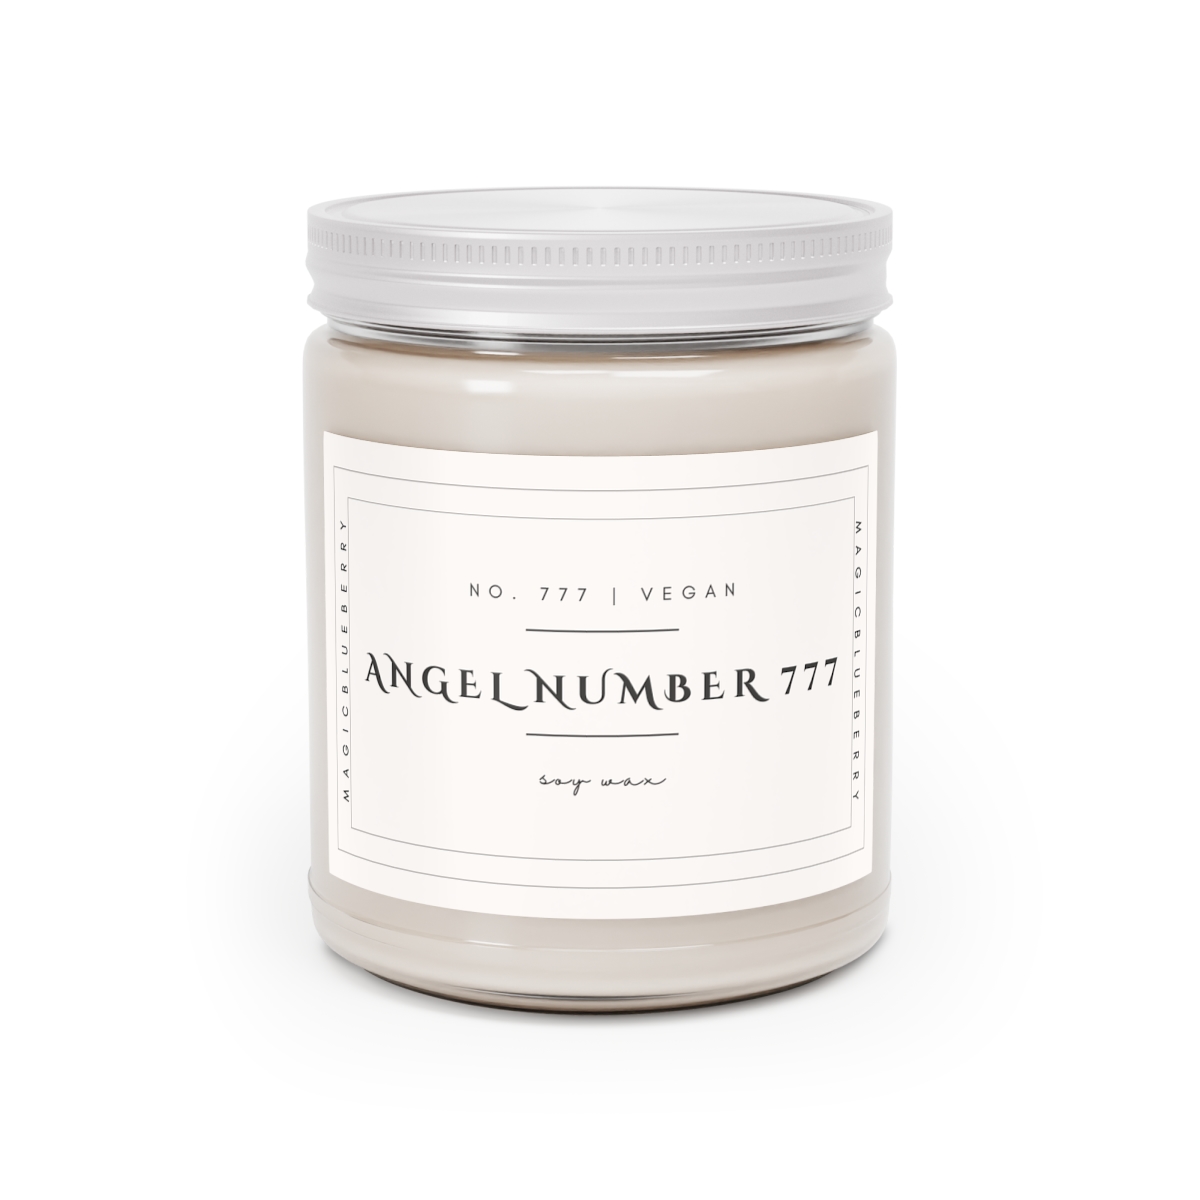 Angel number777 Scented Vegan Soy Wax Candle Clear Jar Candle, Spell Candle, Sassy Candle Vegan Candle Cotton Wick Candle Home Decor Candle product thumbnail image